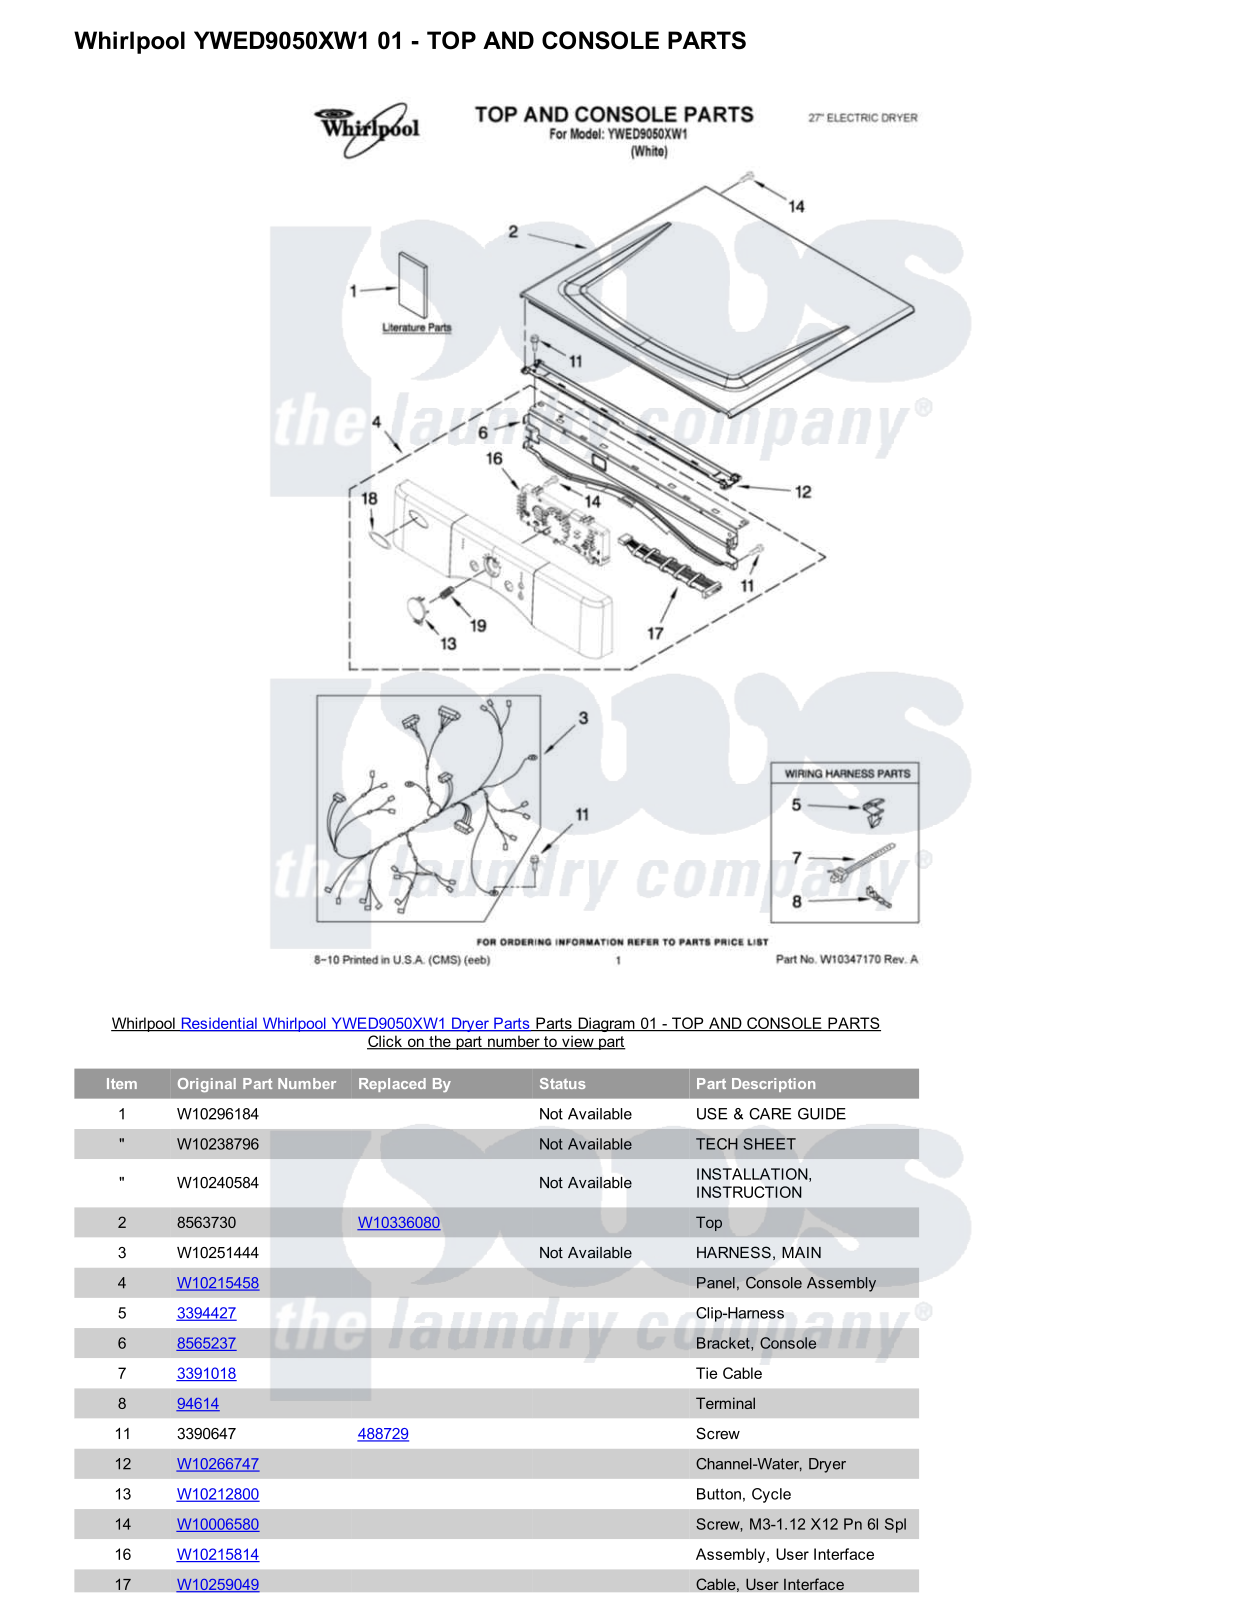 Whirlpool YWED9050XW1 Parts Diagram